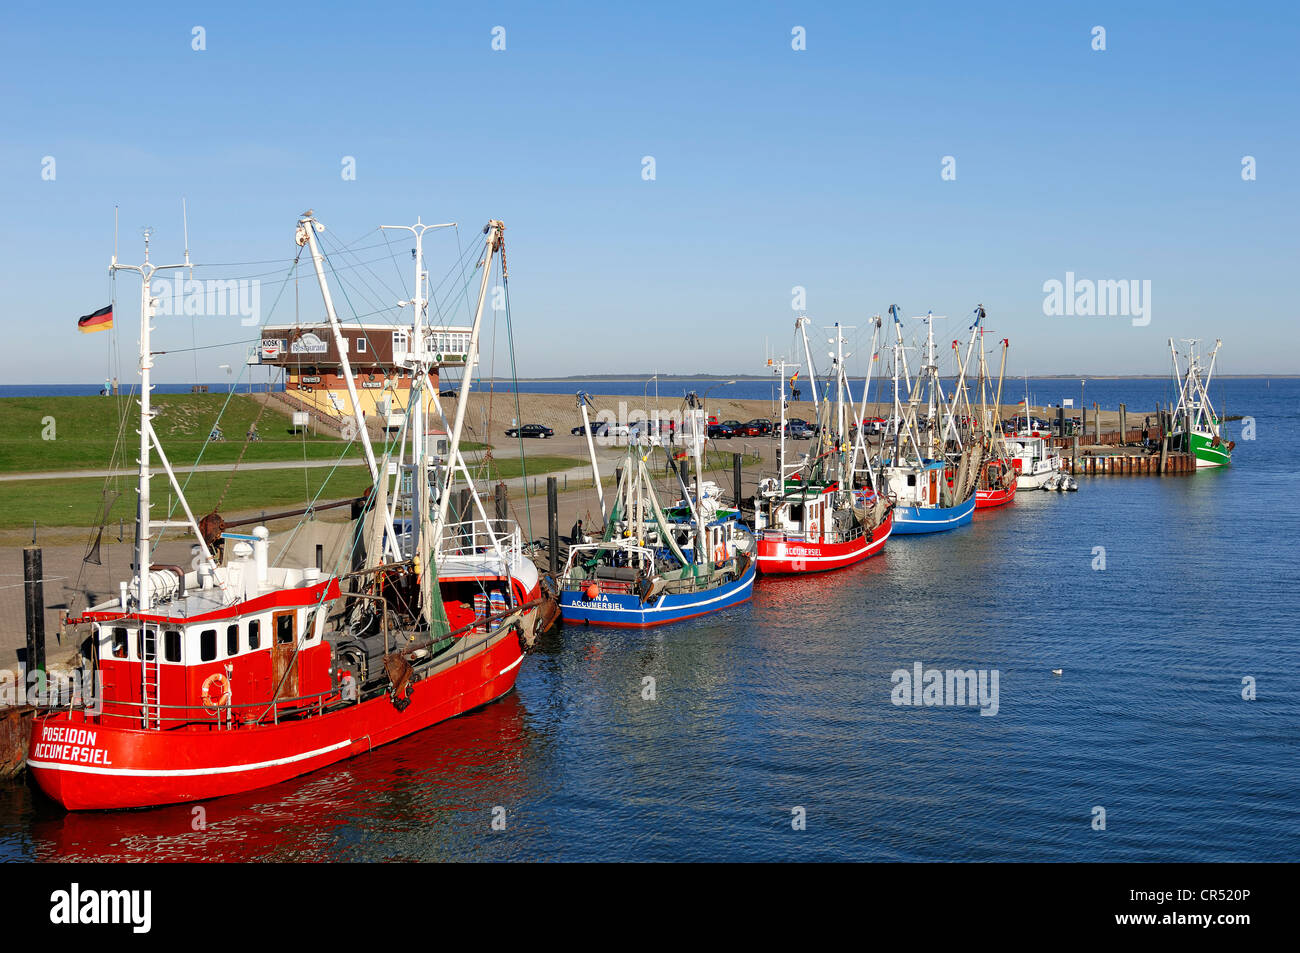 Shrimp cutters in harbour, Accumersiel, East Frisia, Lower Saxony, Germany, Europe Stock Photo